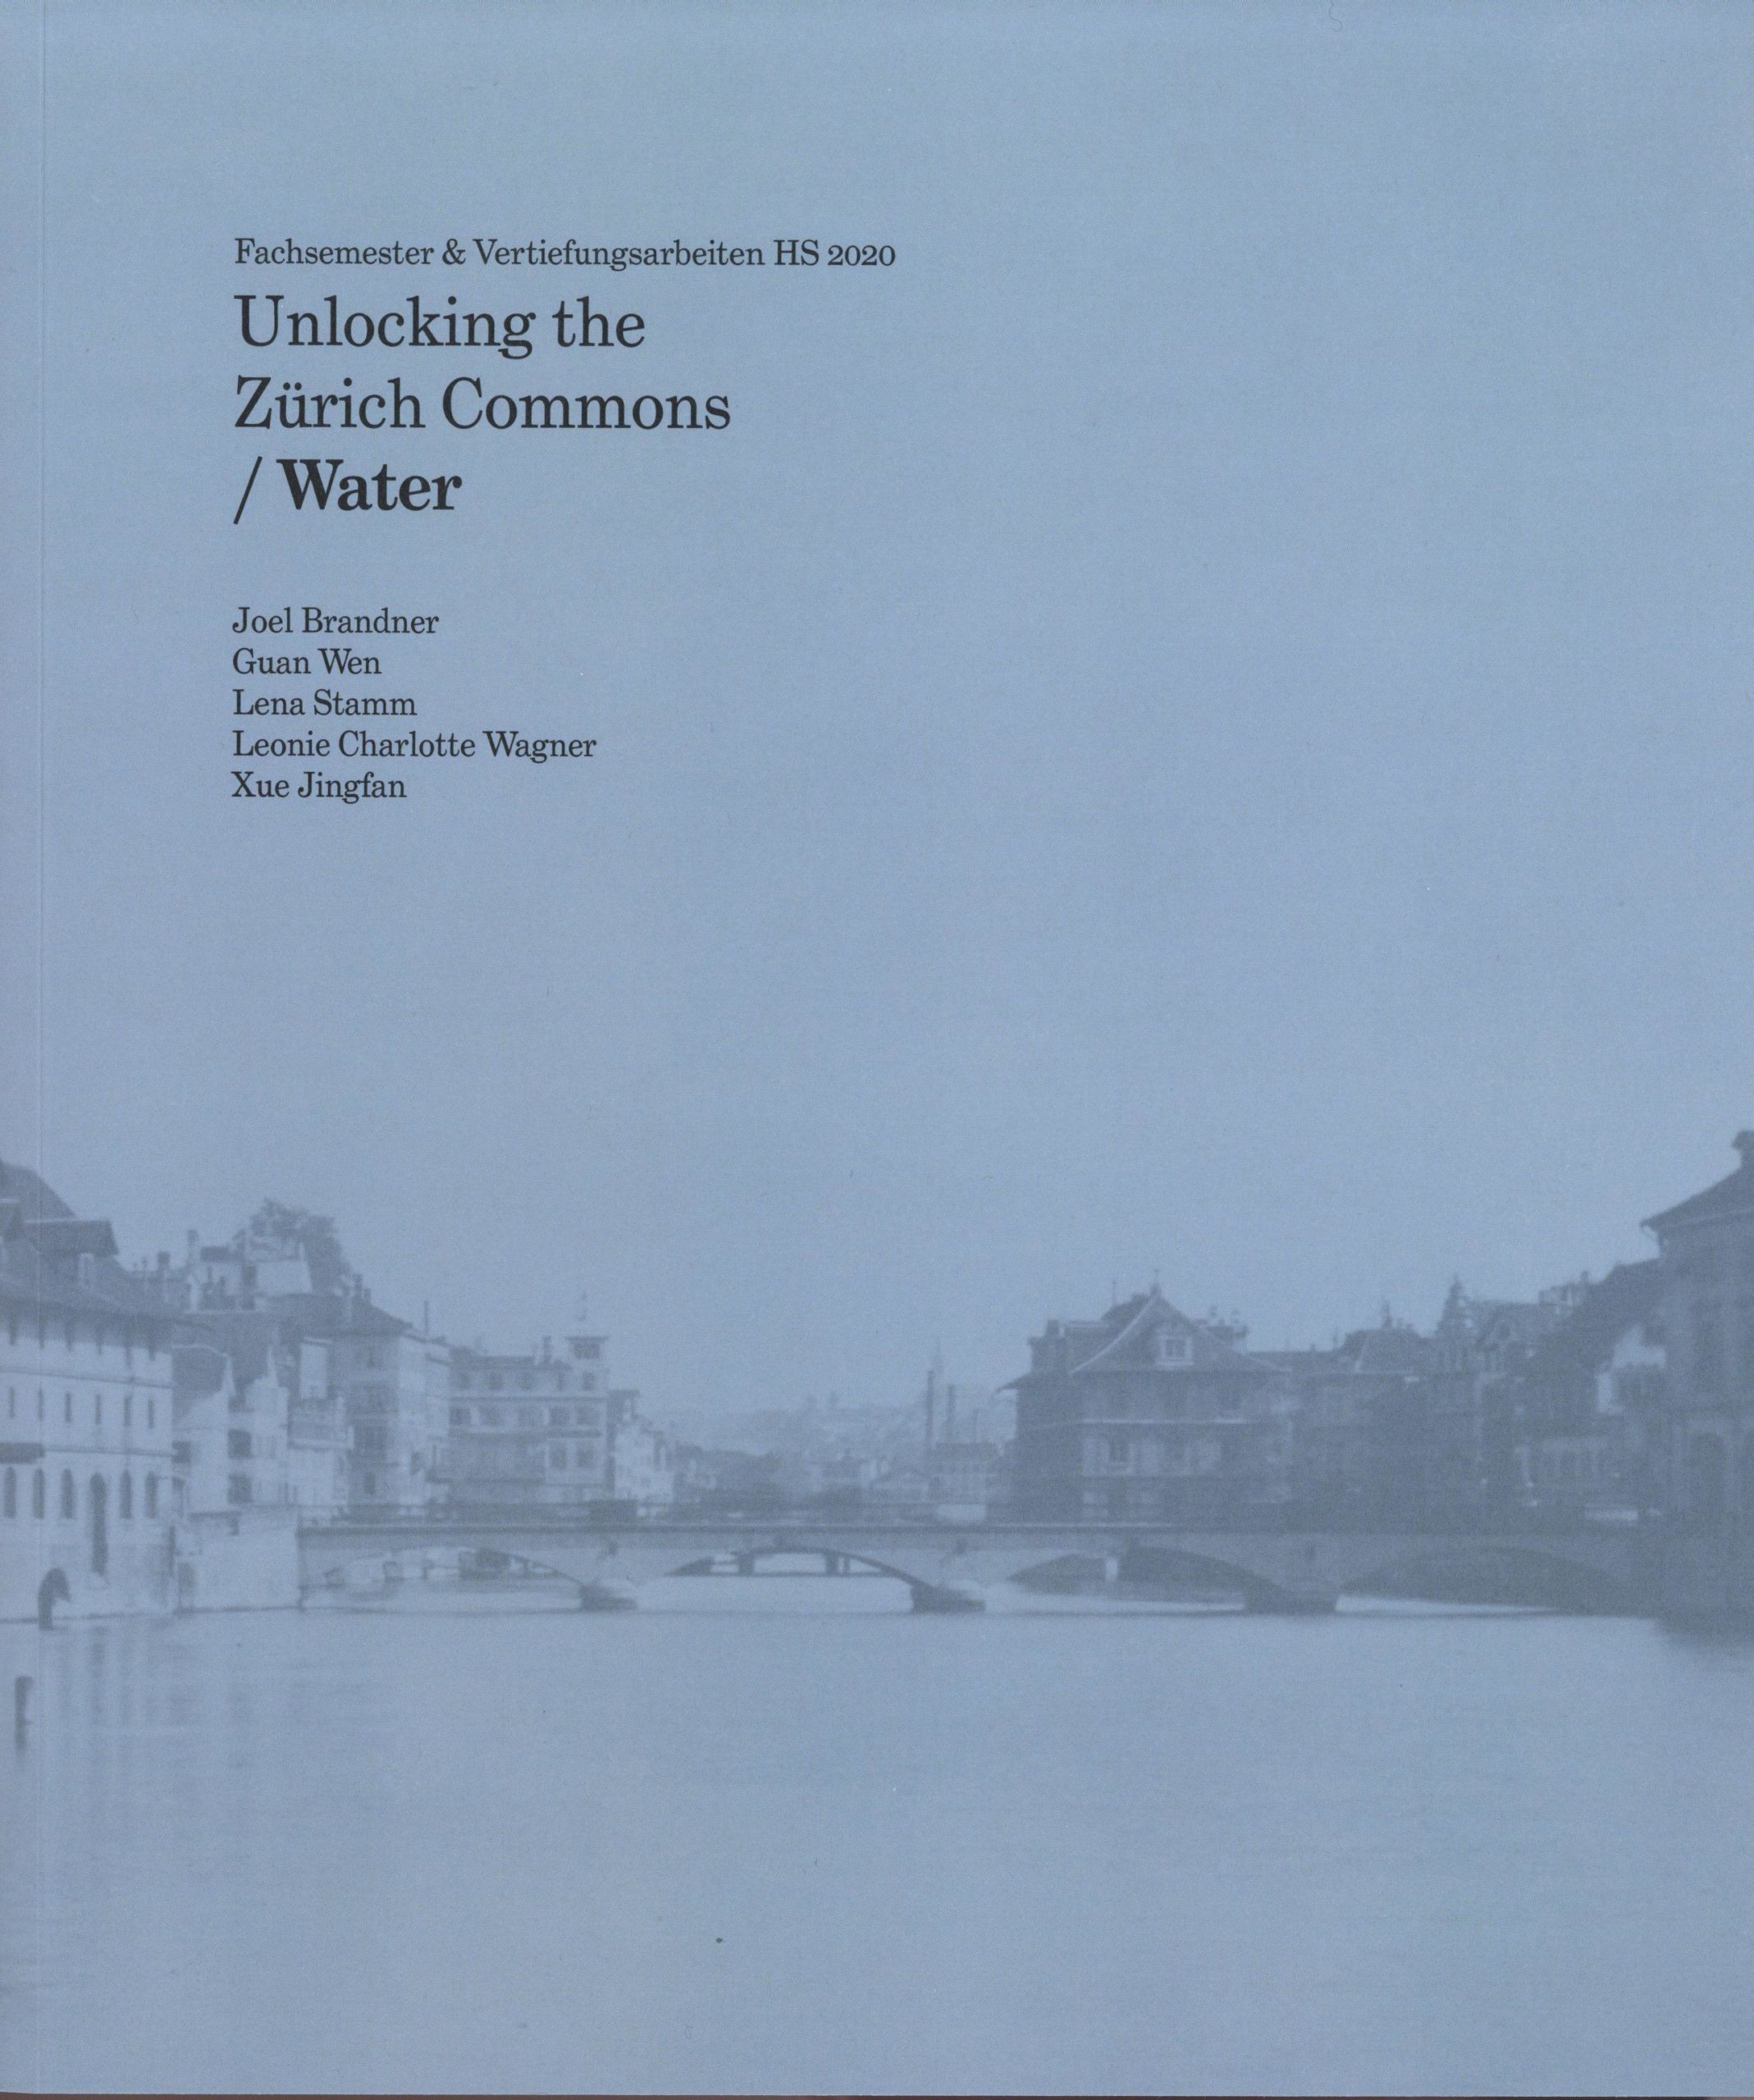 Unlocking the Zürich Commons / Water